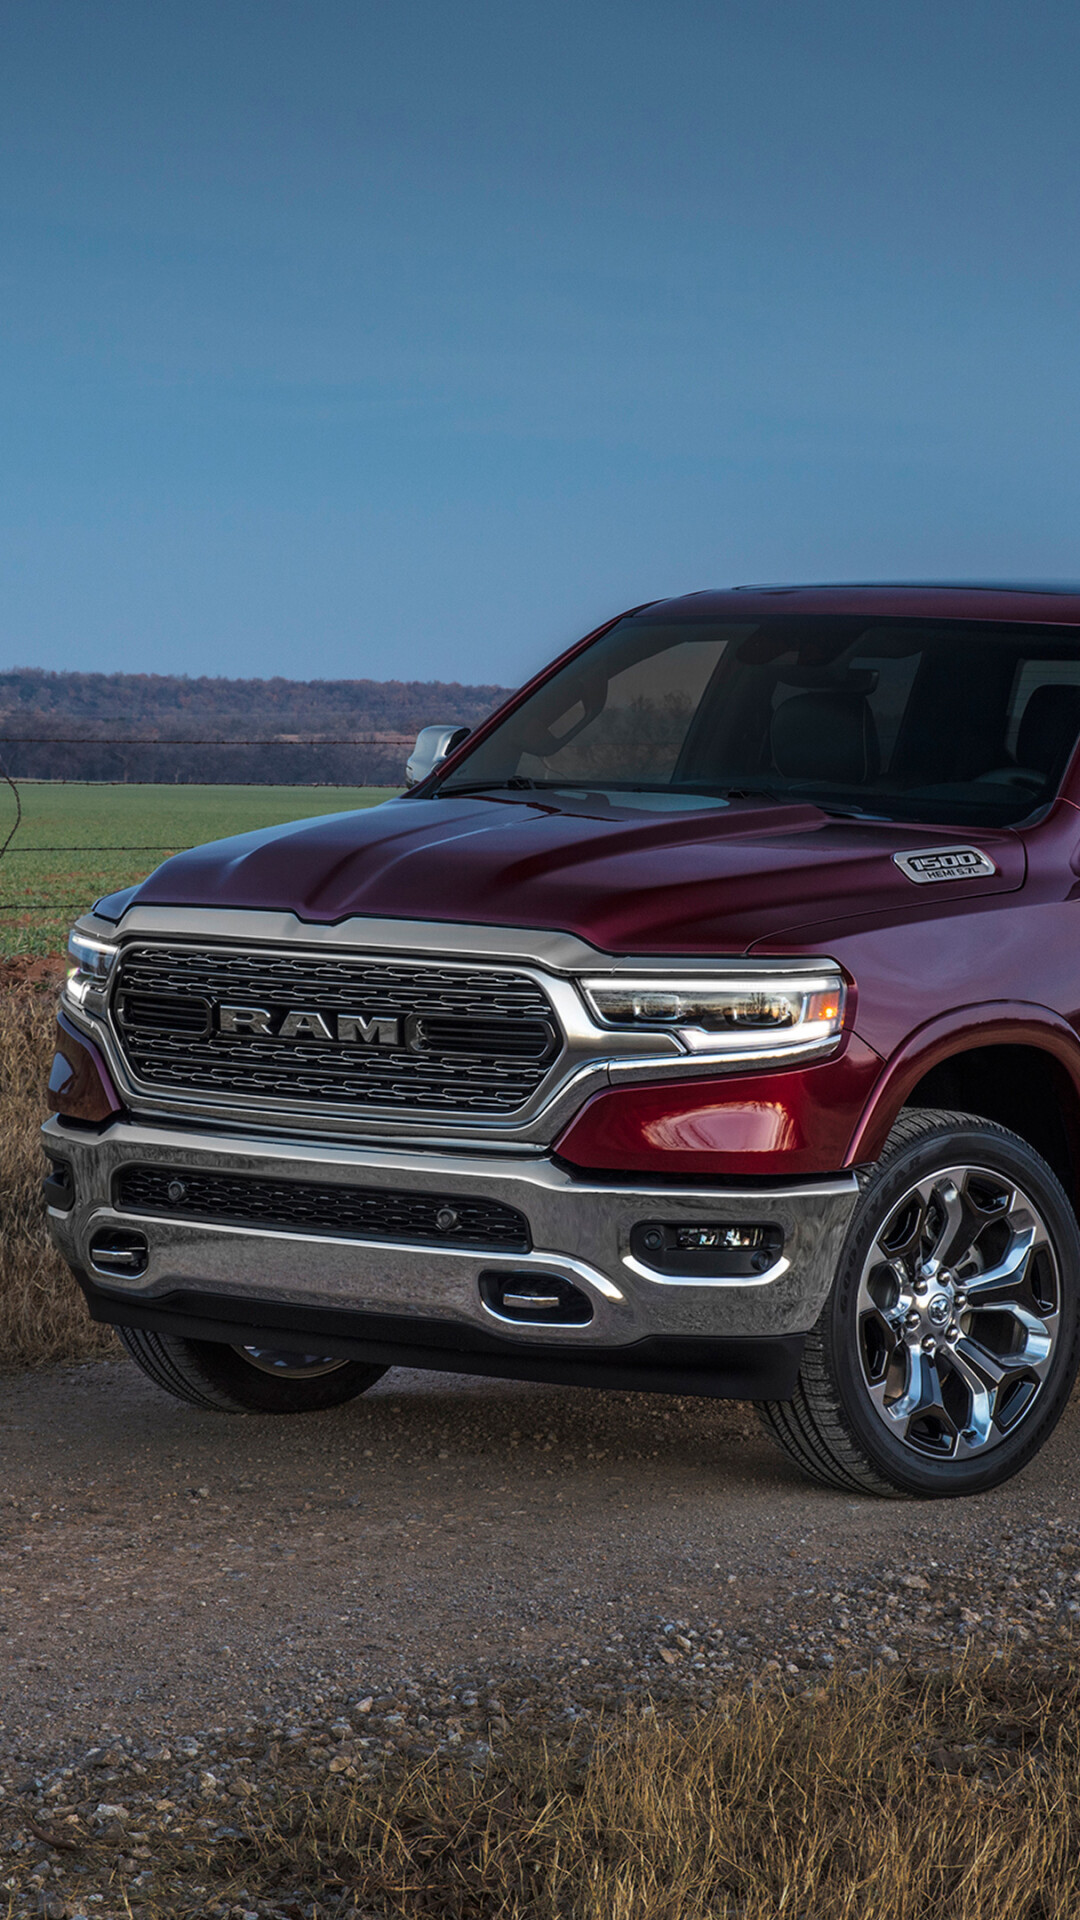 Ram Pickup: 1500 Limited Crew Cab 2018, The successor of the Dodge D series bakkie. 1080x1920 Full HD Background.